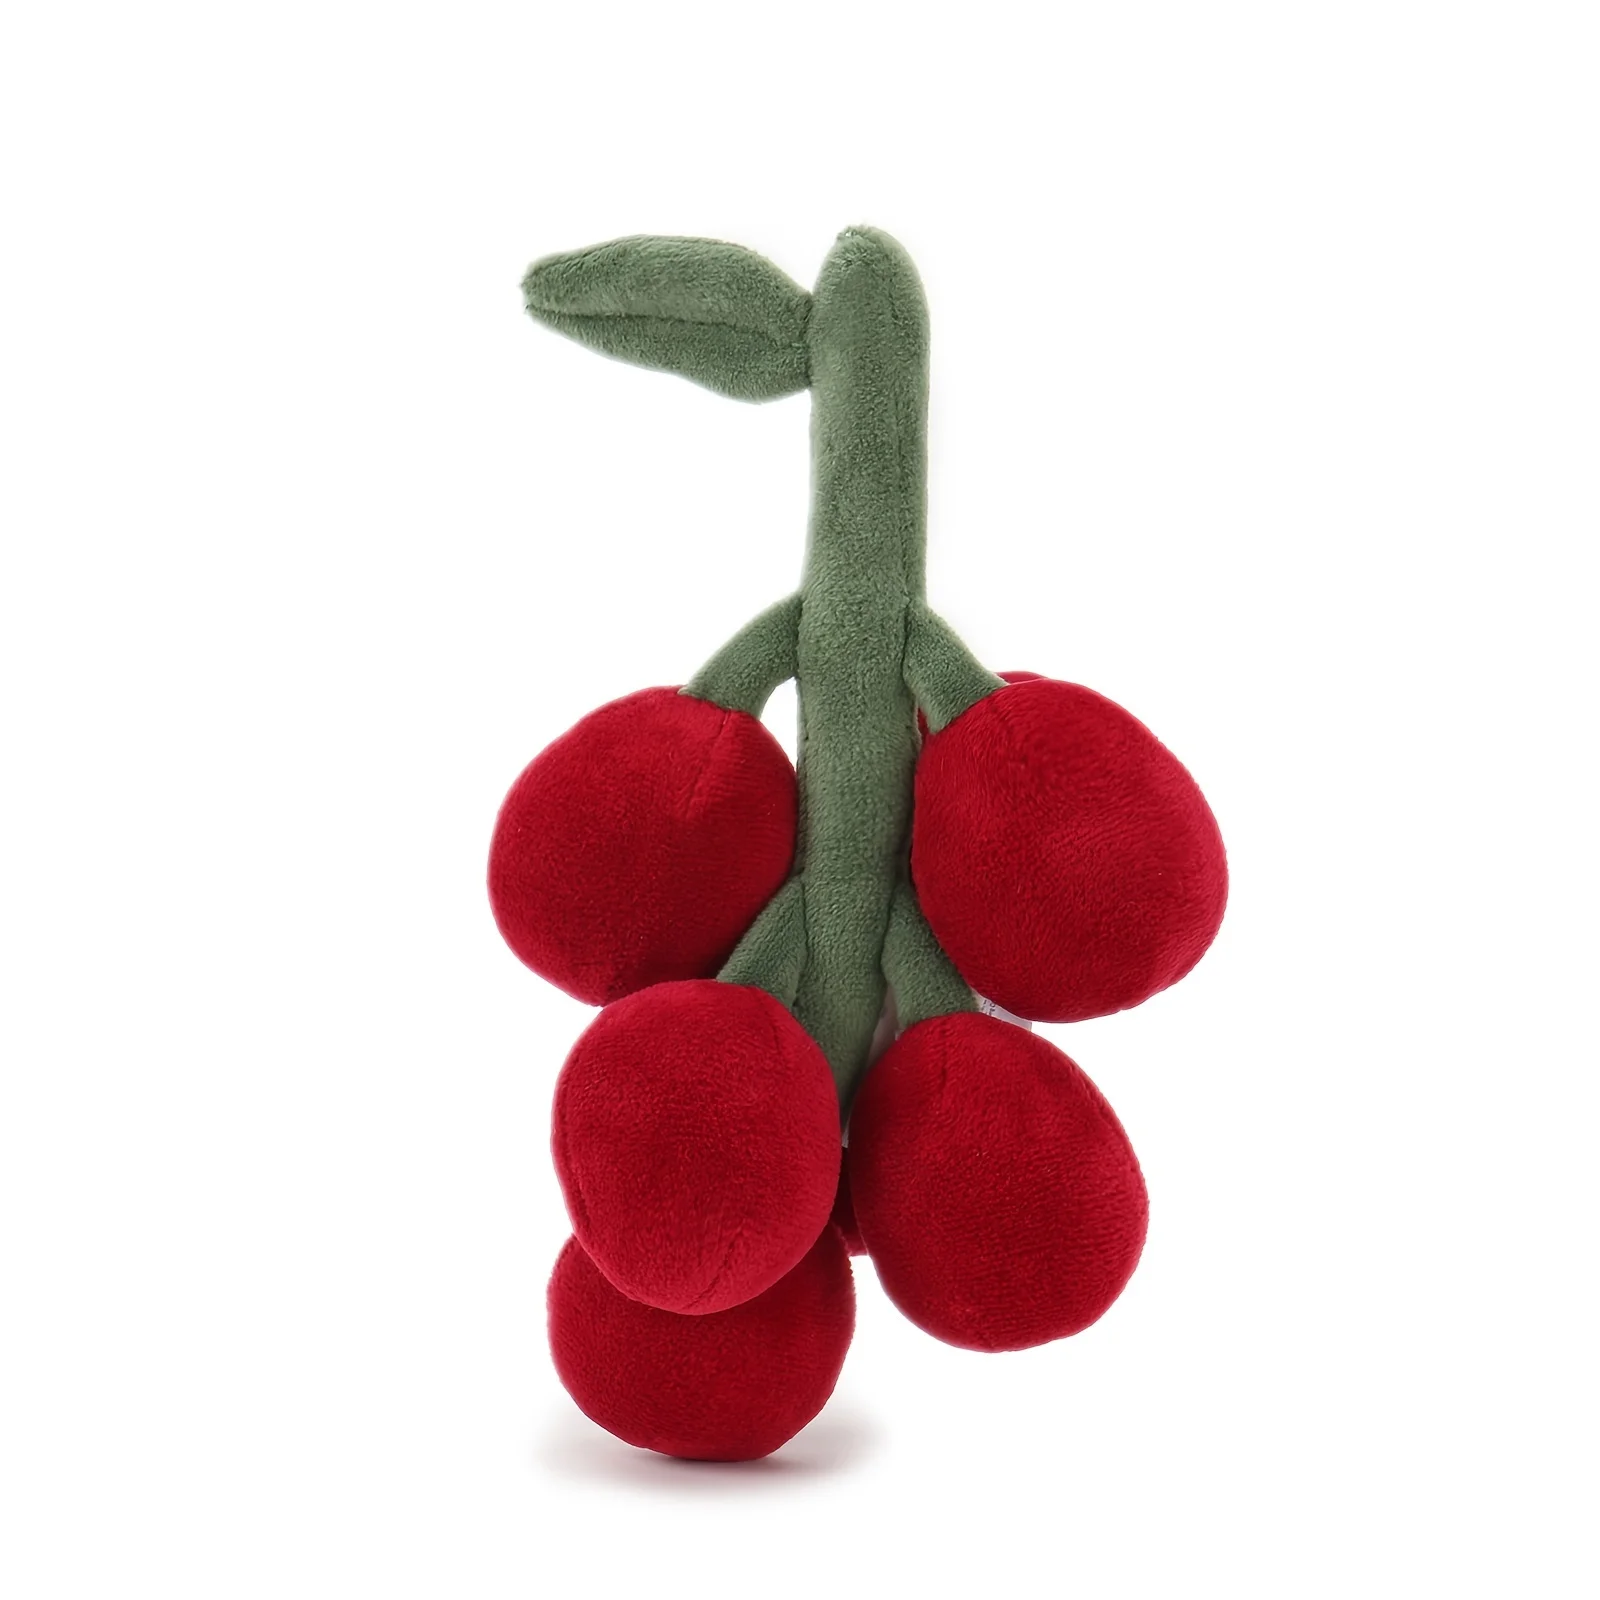 Red Grapes Plush Toy | Stuffed Fruit Paradise Series - Soft Baby Soother -4